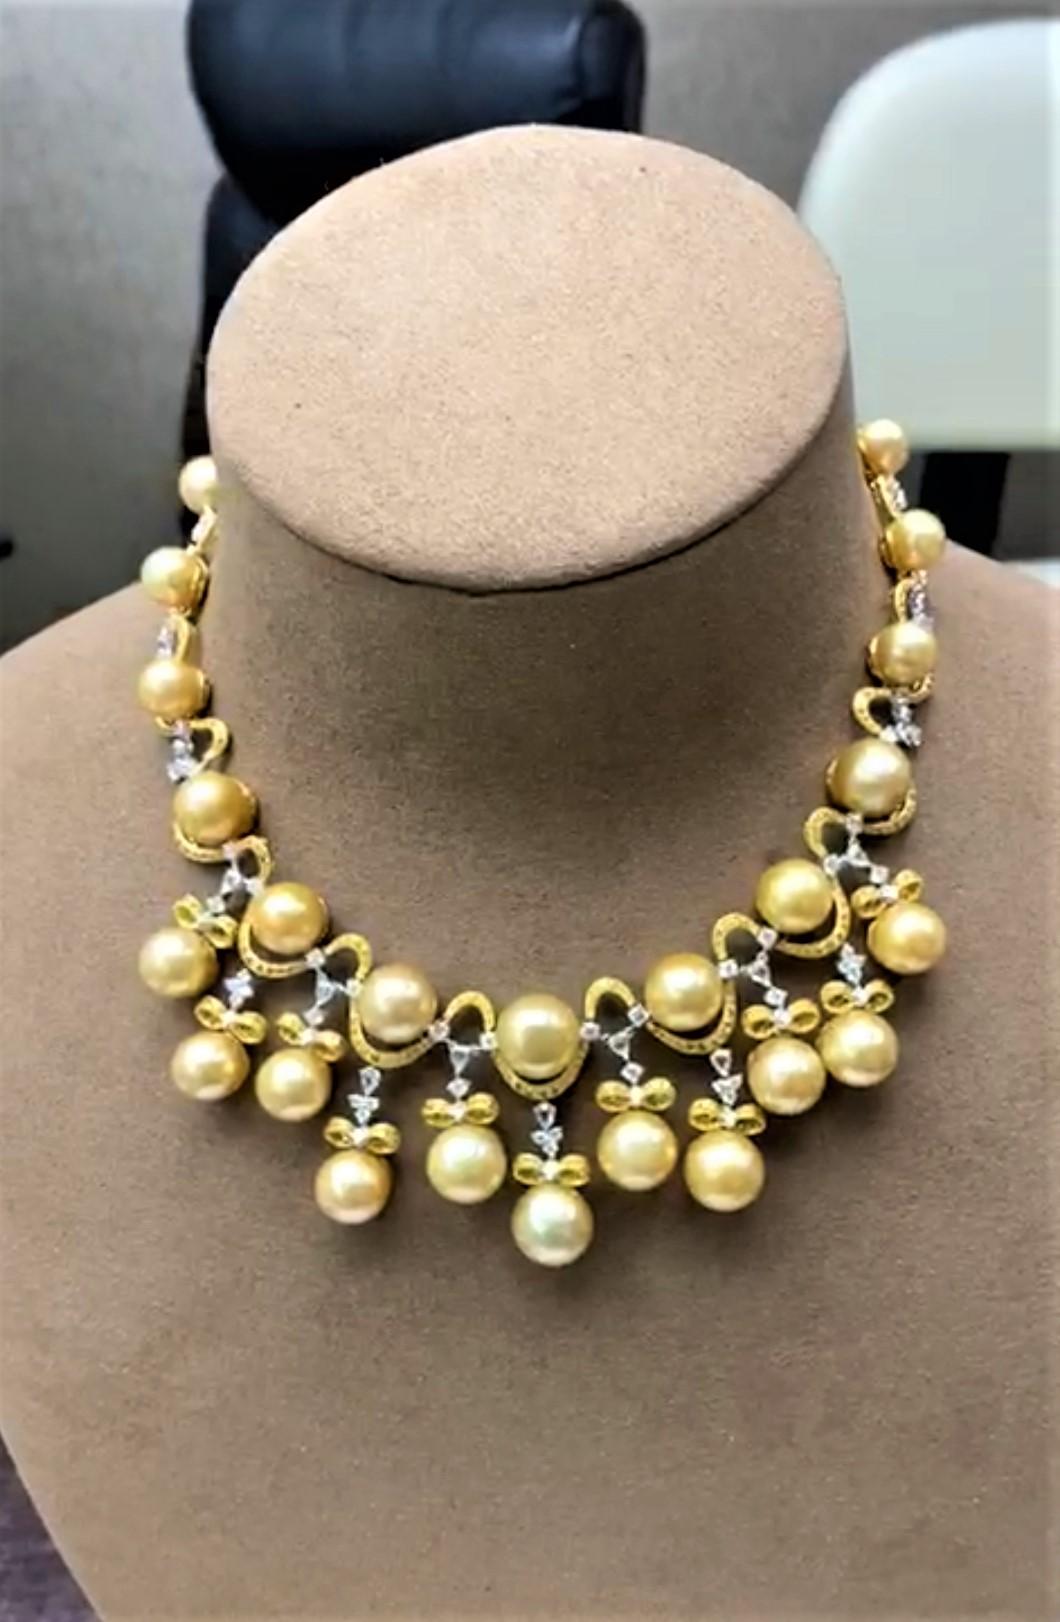 The Following Item we are offering is this Beautiful Important 18KT Gold Magnificent Rare Fancy Yellow Diamond Golden South Sea Pearl Necklace. Necklace is comprised of 30 Beautiful Magnificent High Luster Large South Sea Golden Pearls that gives